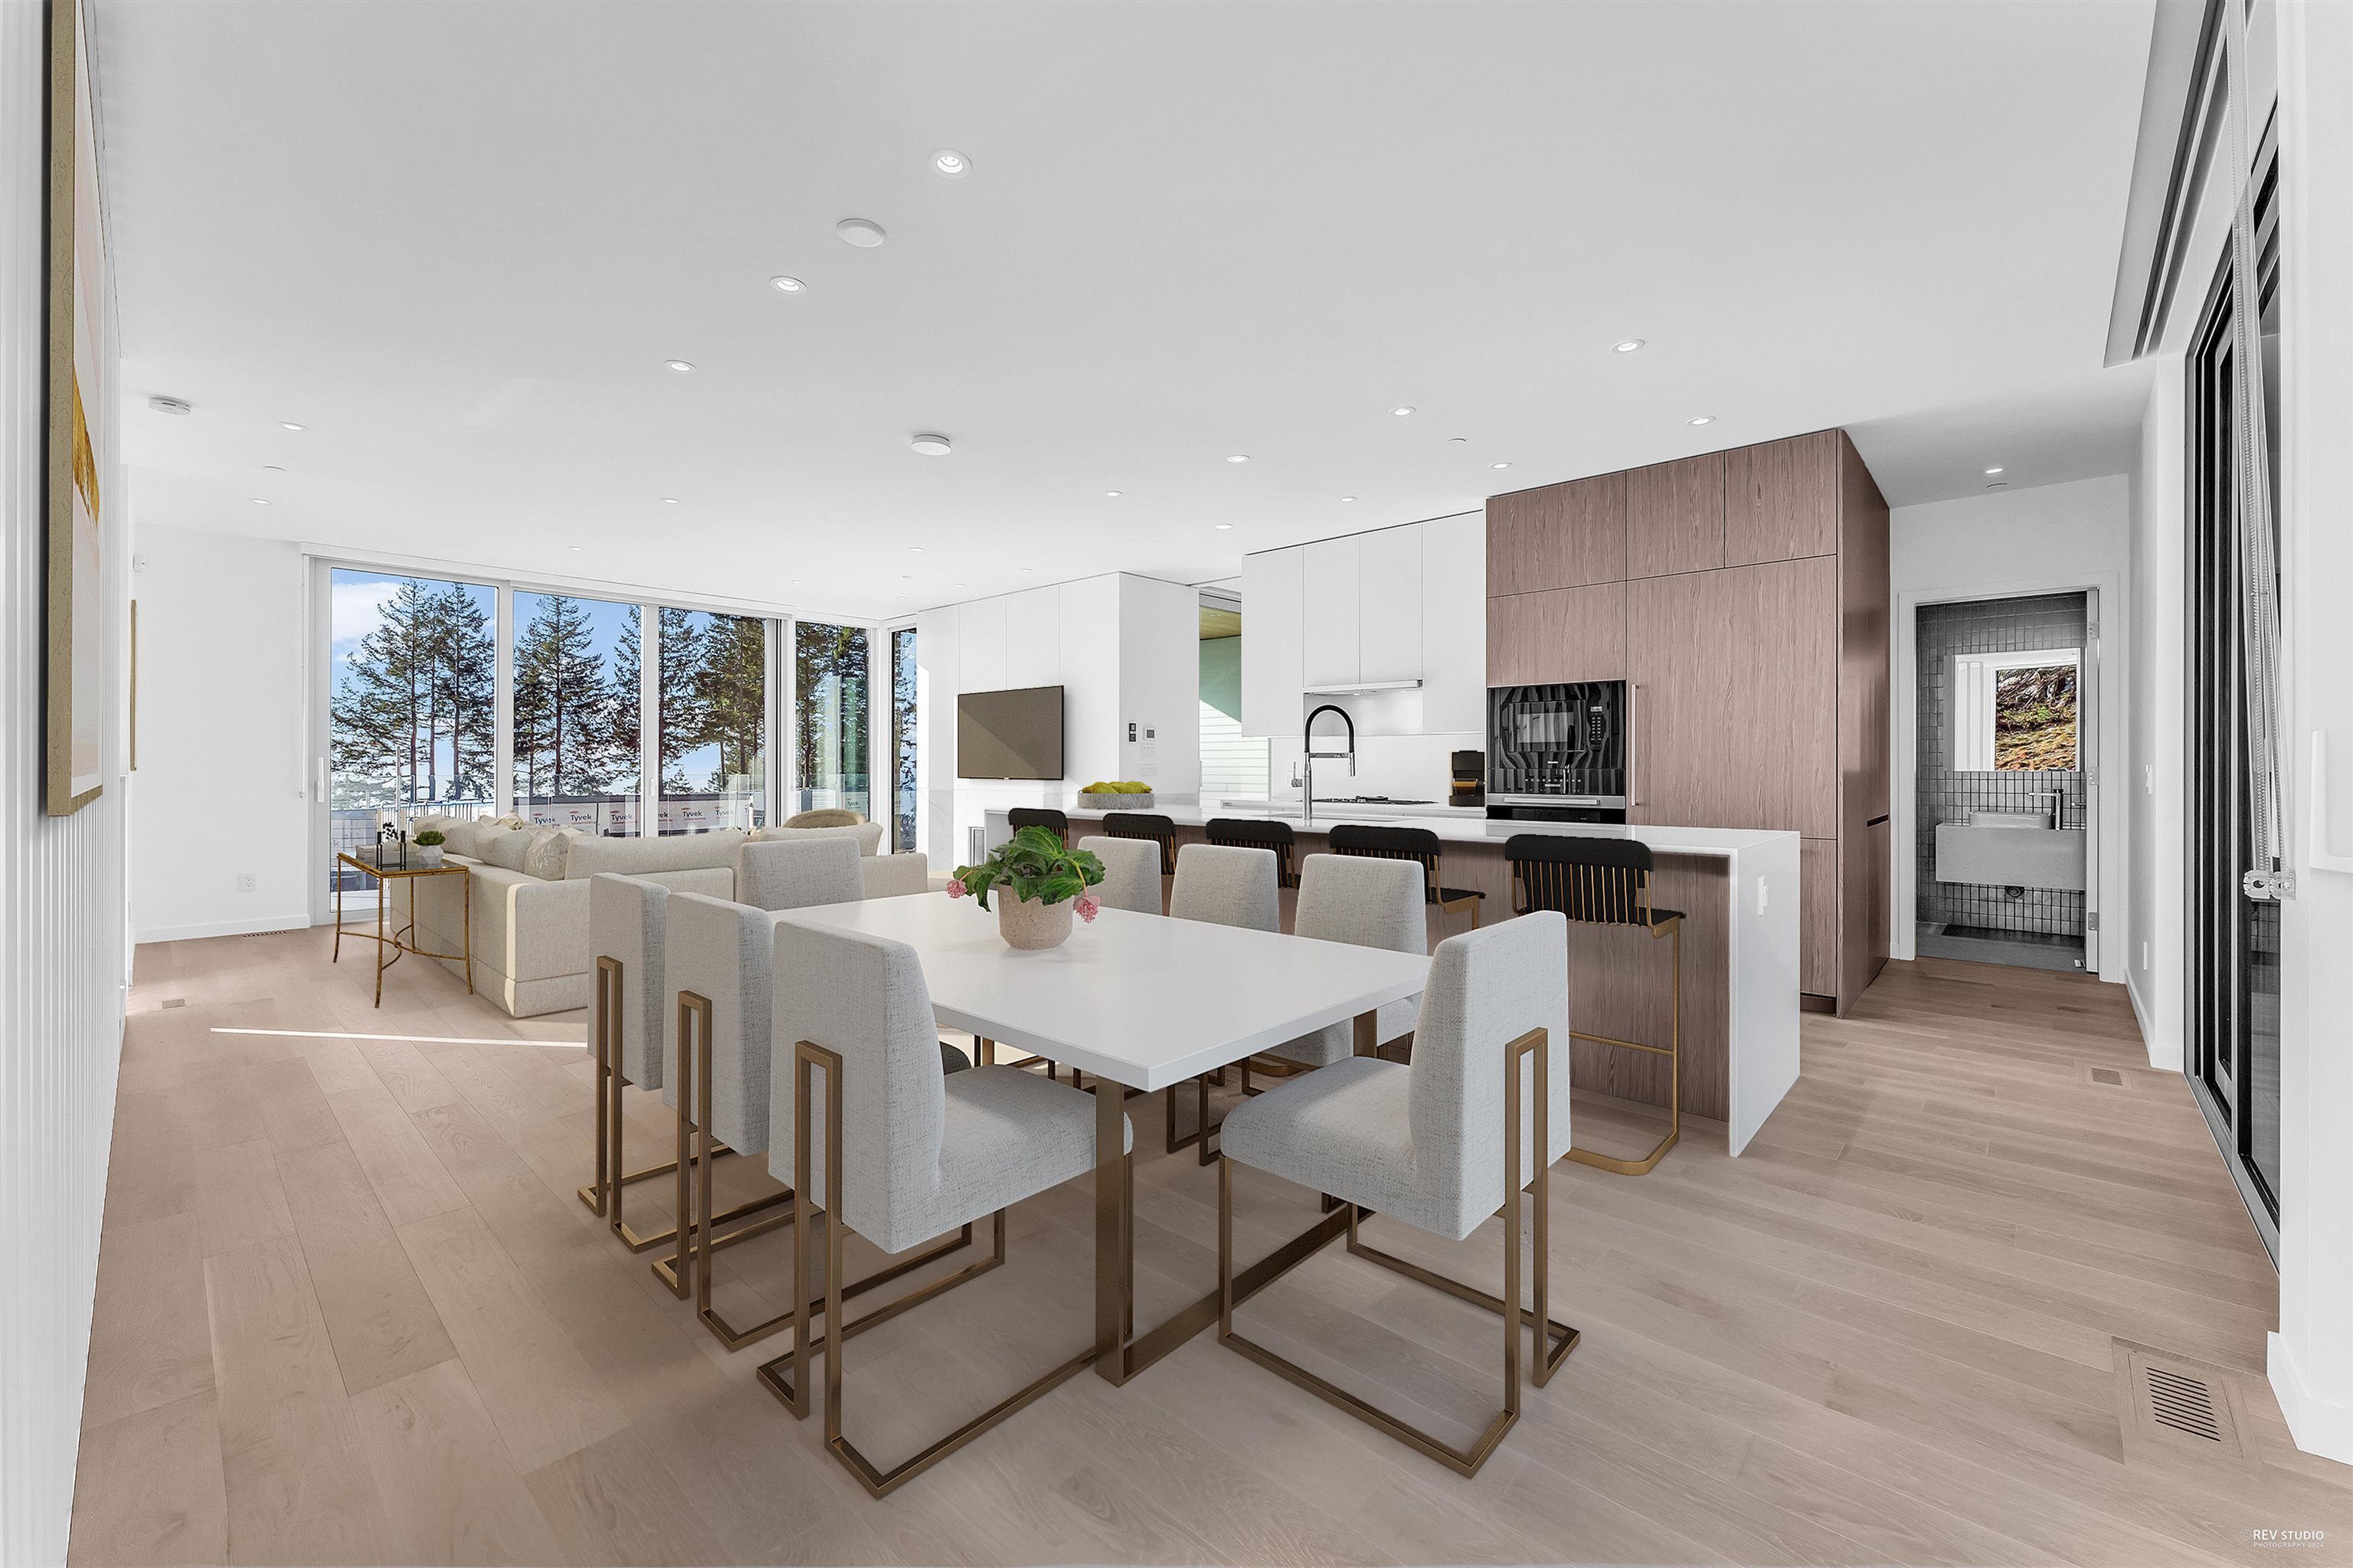 Listing image of 3317 CHIPPENDALE ROAD